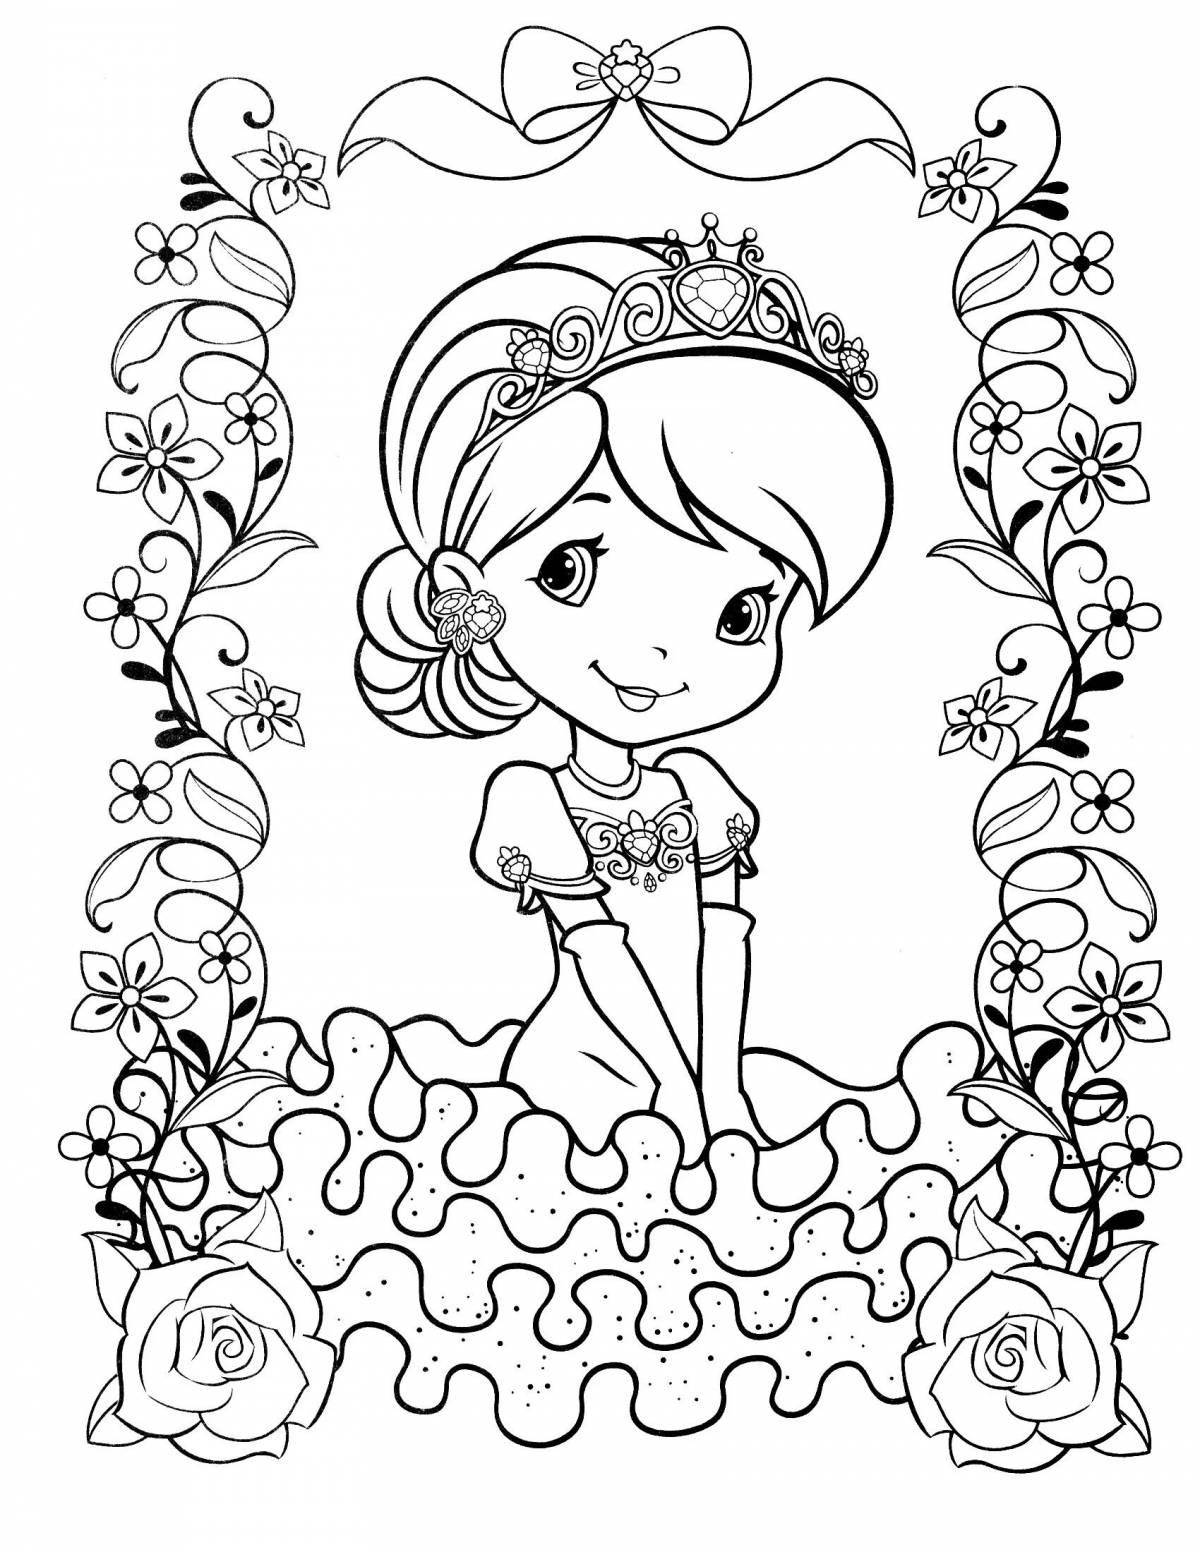 Charming beautiful children's coloring book